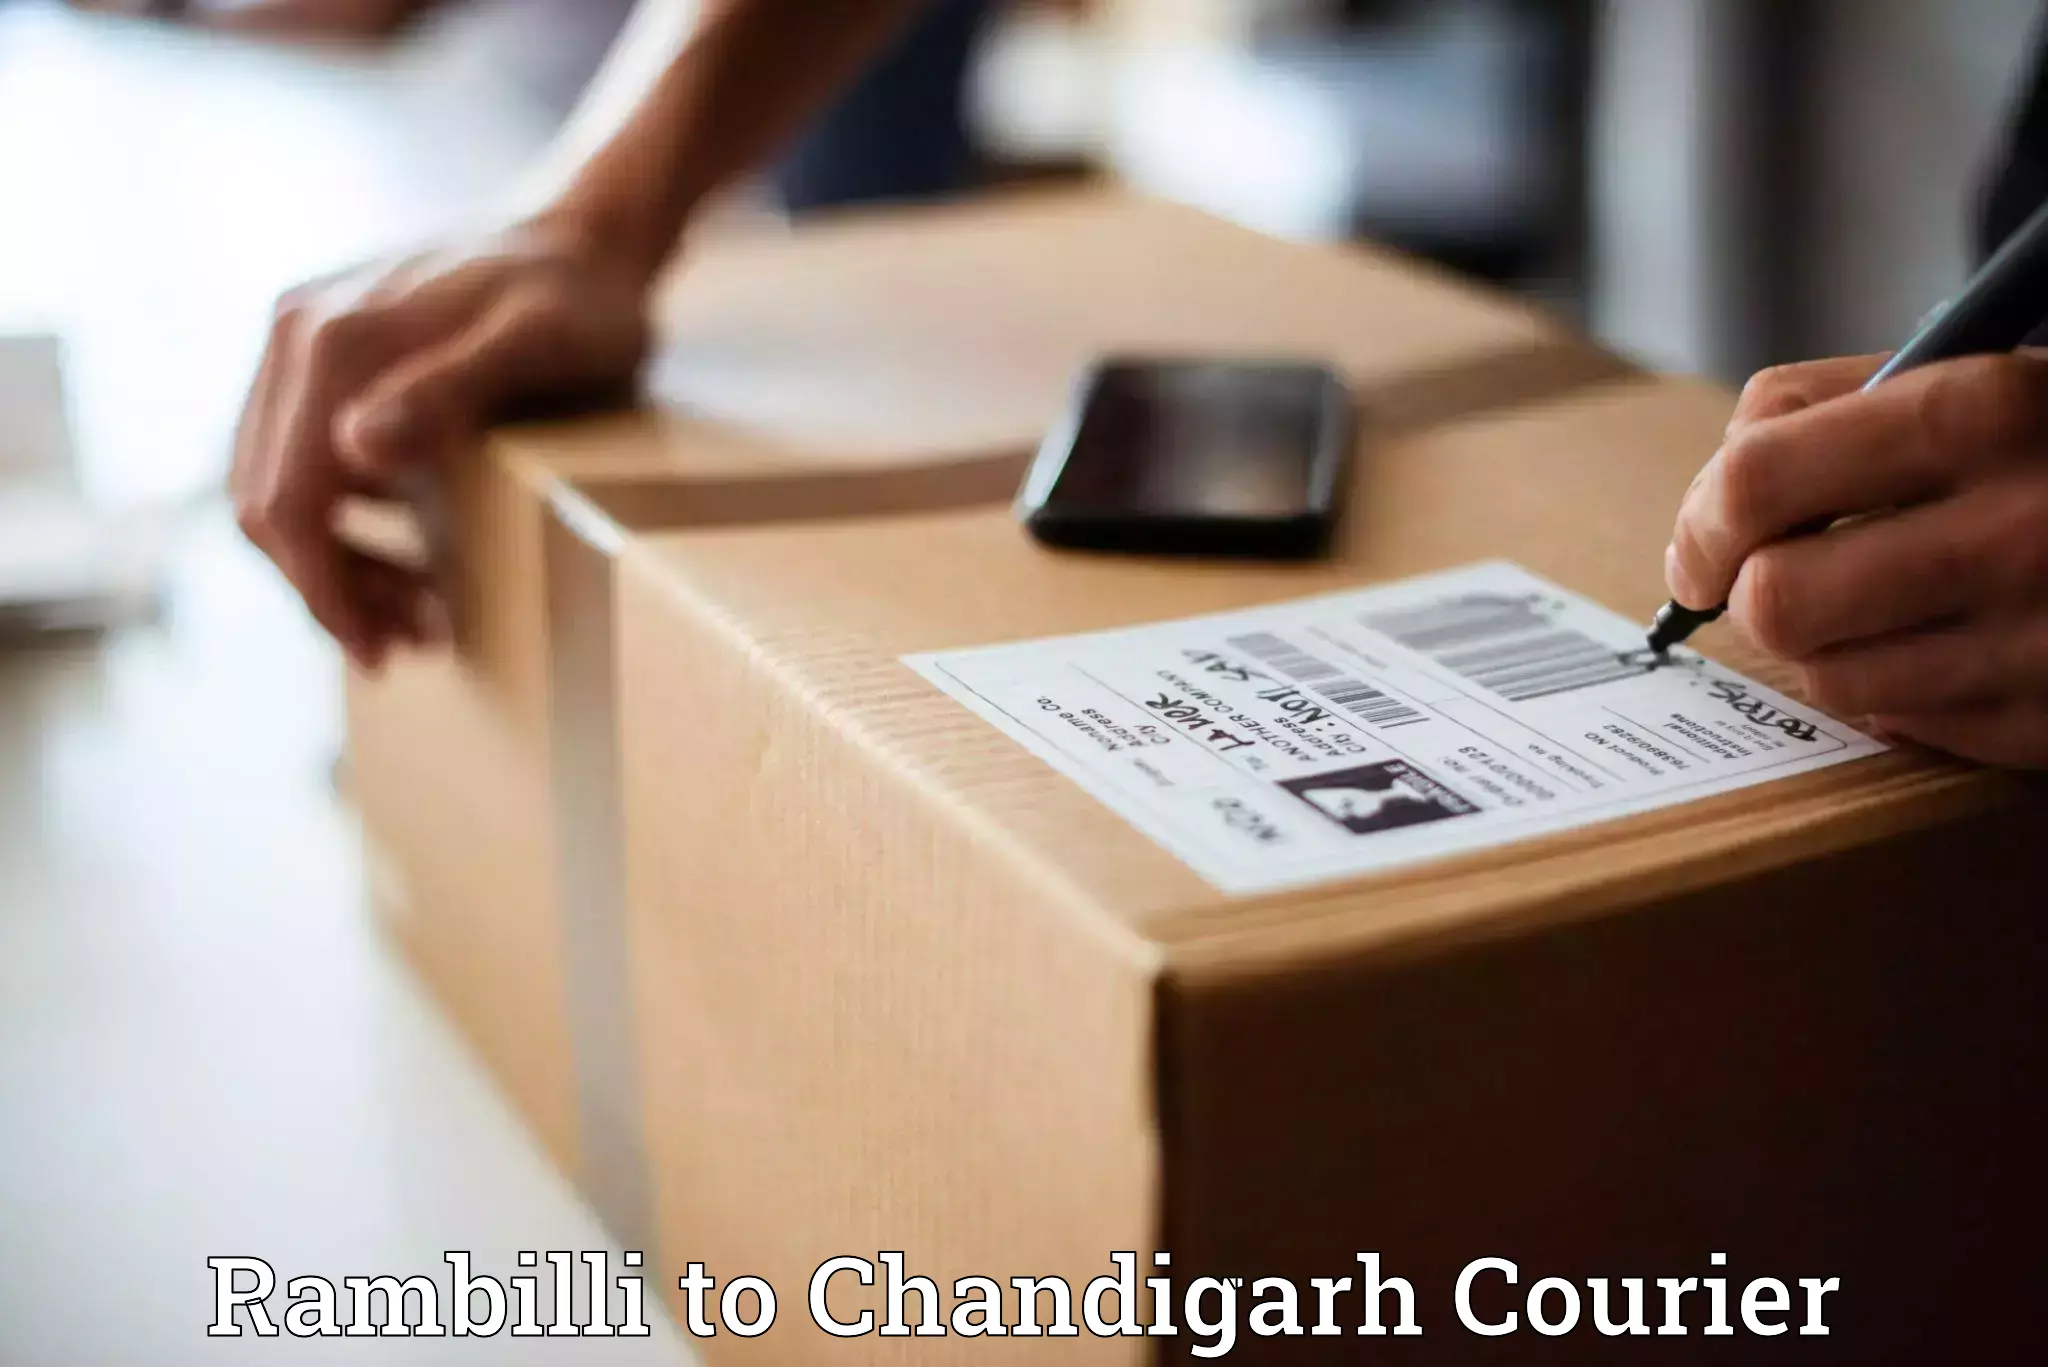 Next-generation courier services Rambilli to Chandigarh